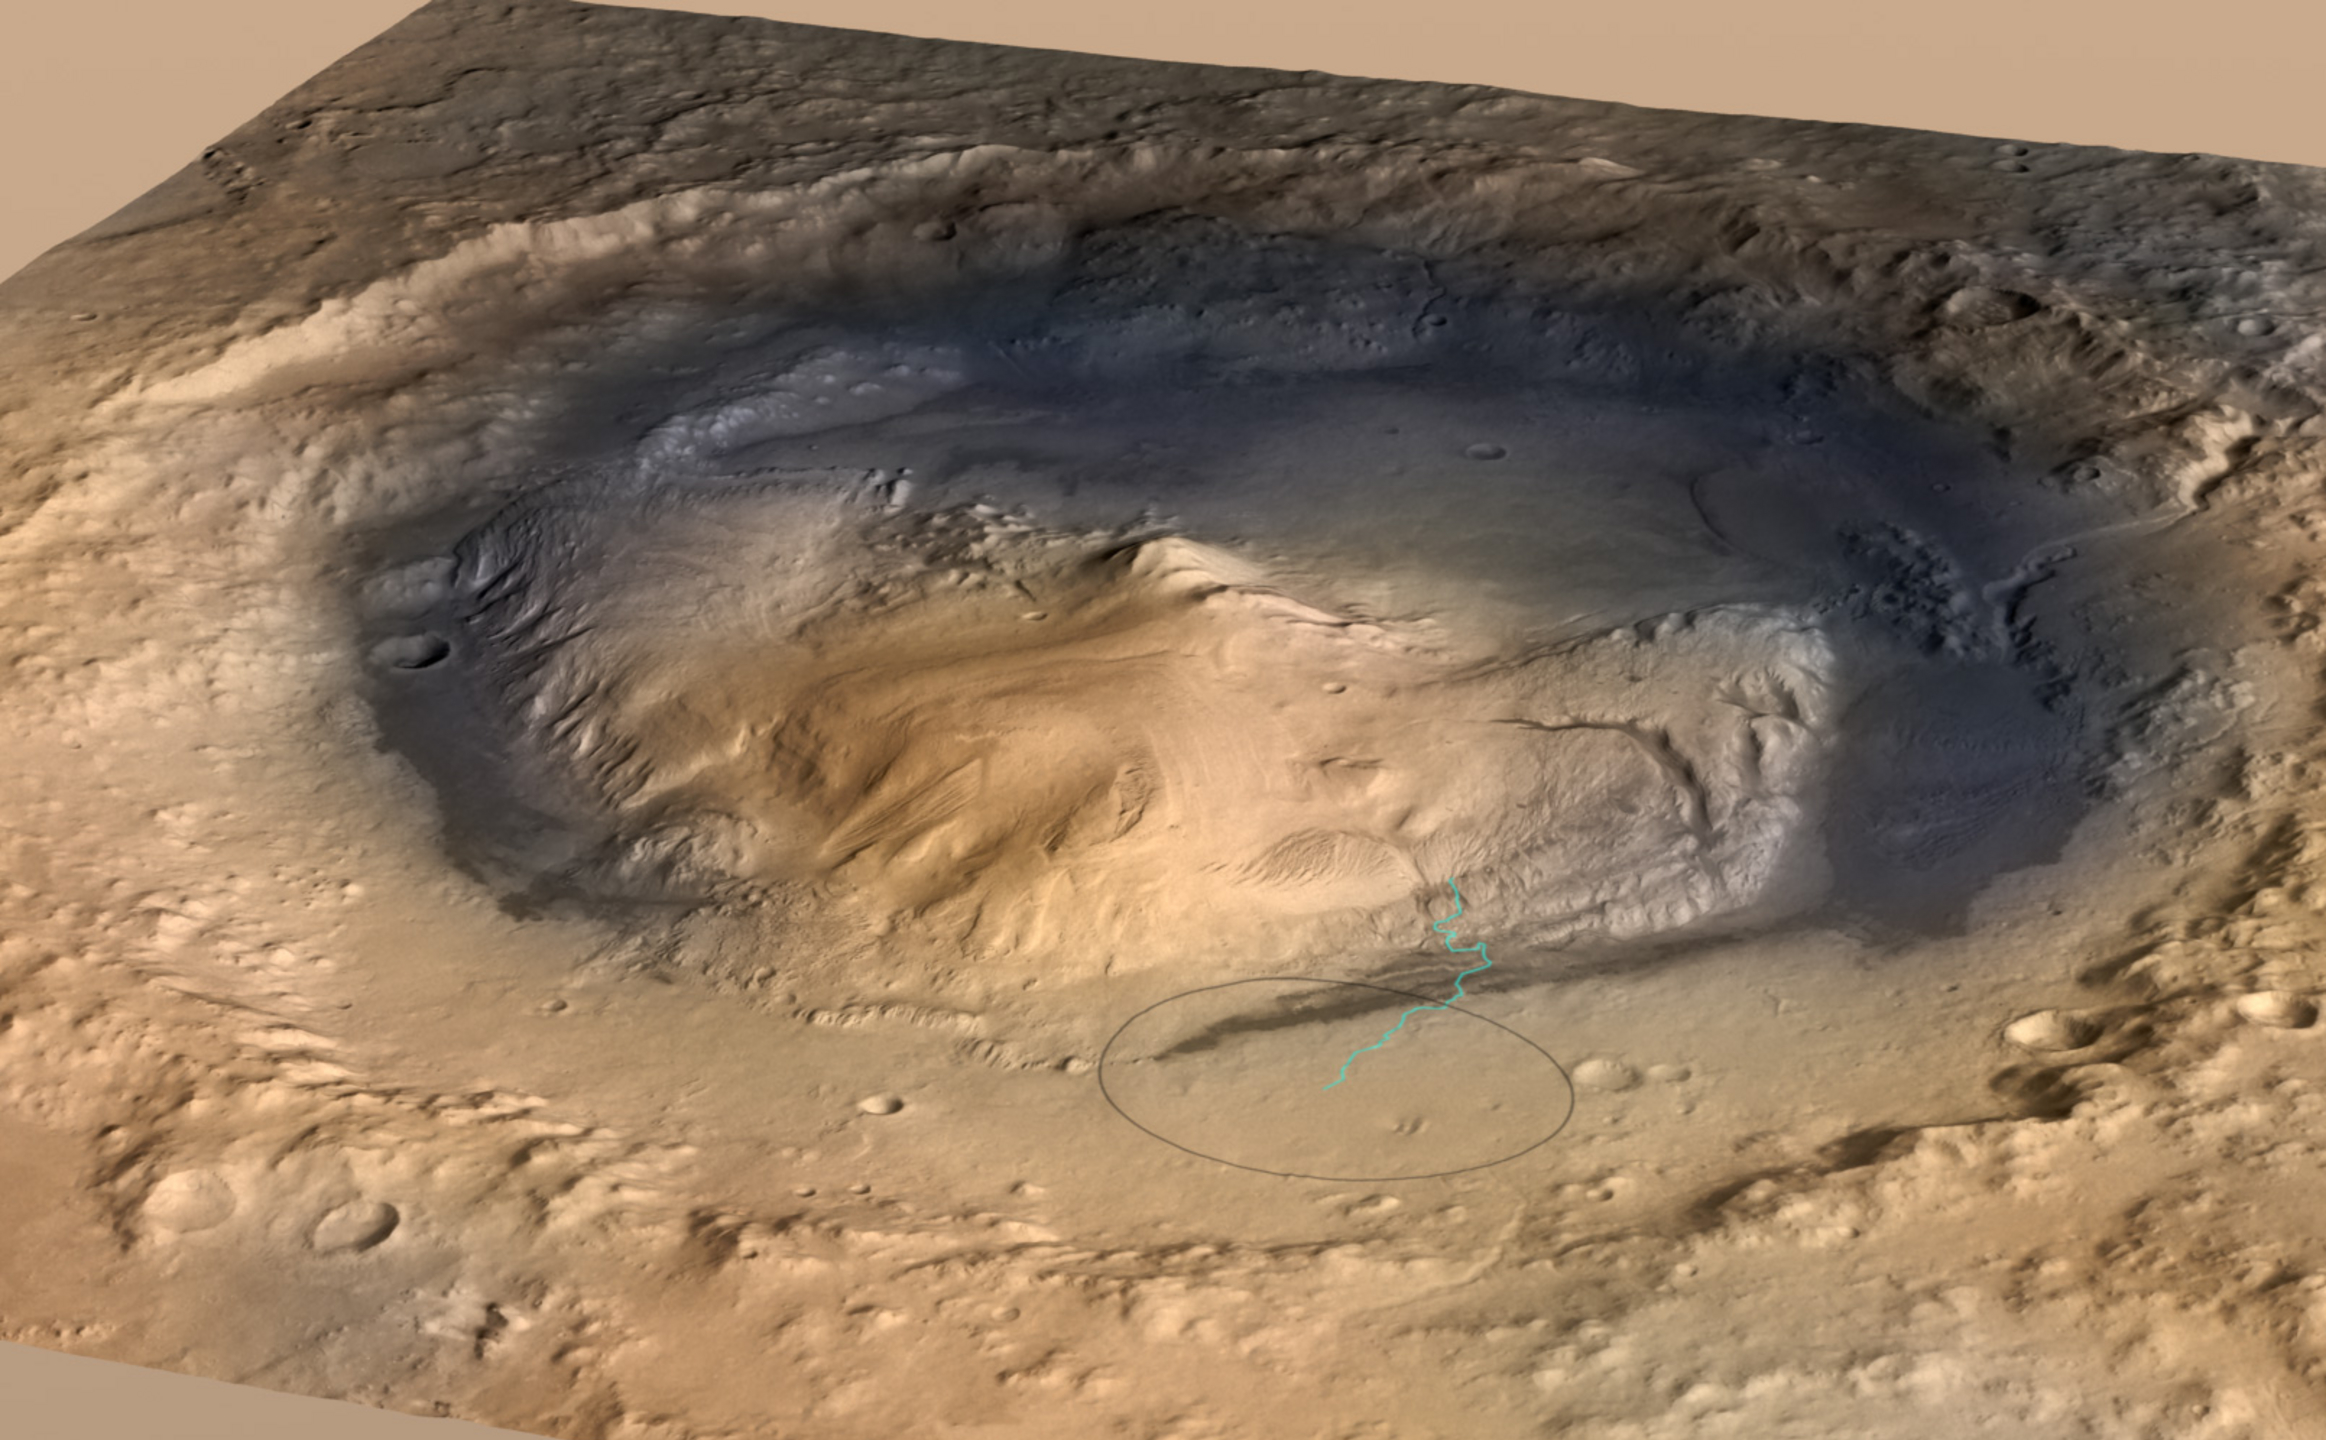 Curiosity, the big rover of NASA's Mars Science Laboratory mission, will land in August 2012 near the foot of a mountain inside Gale Crater.